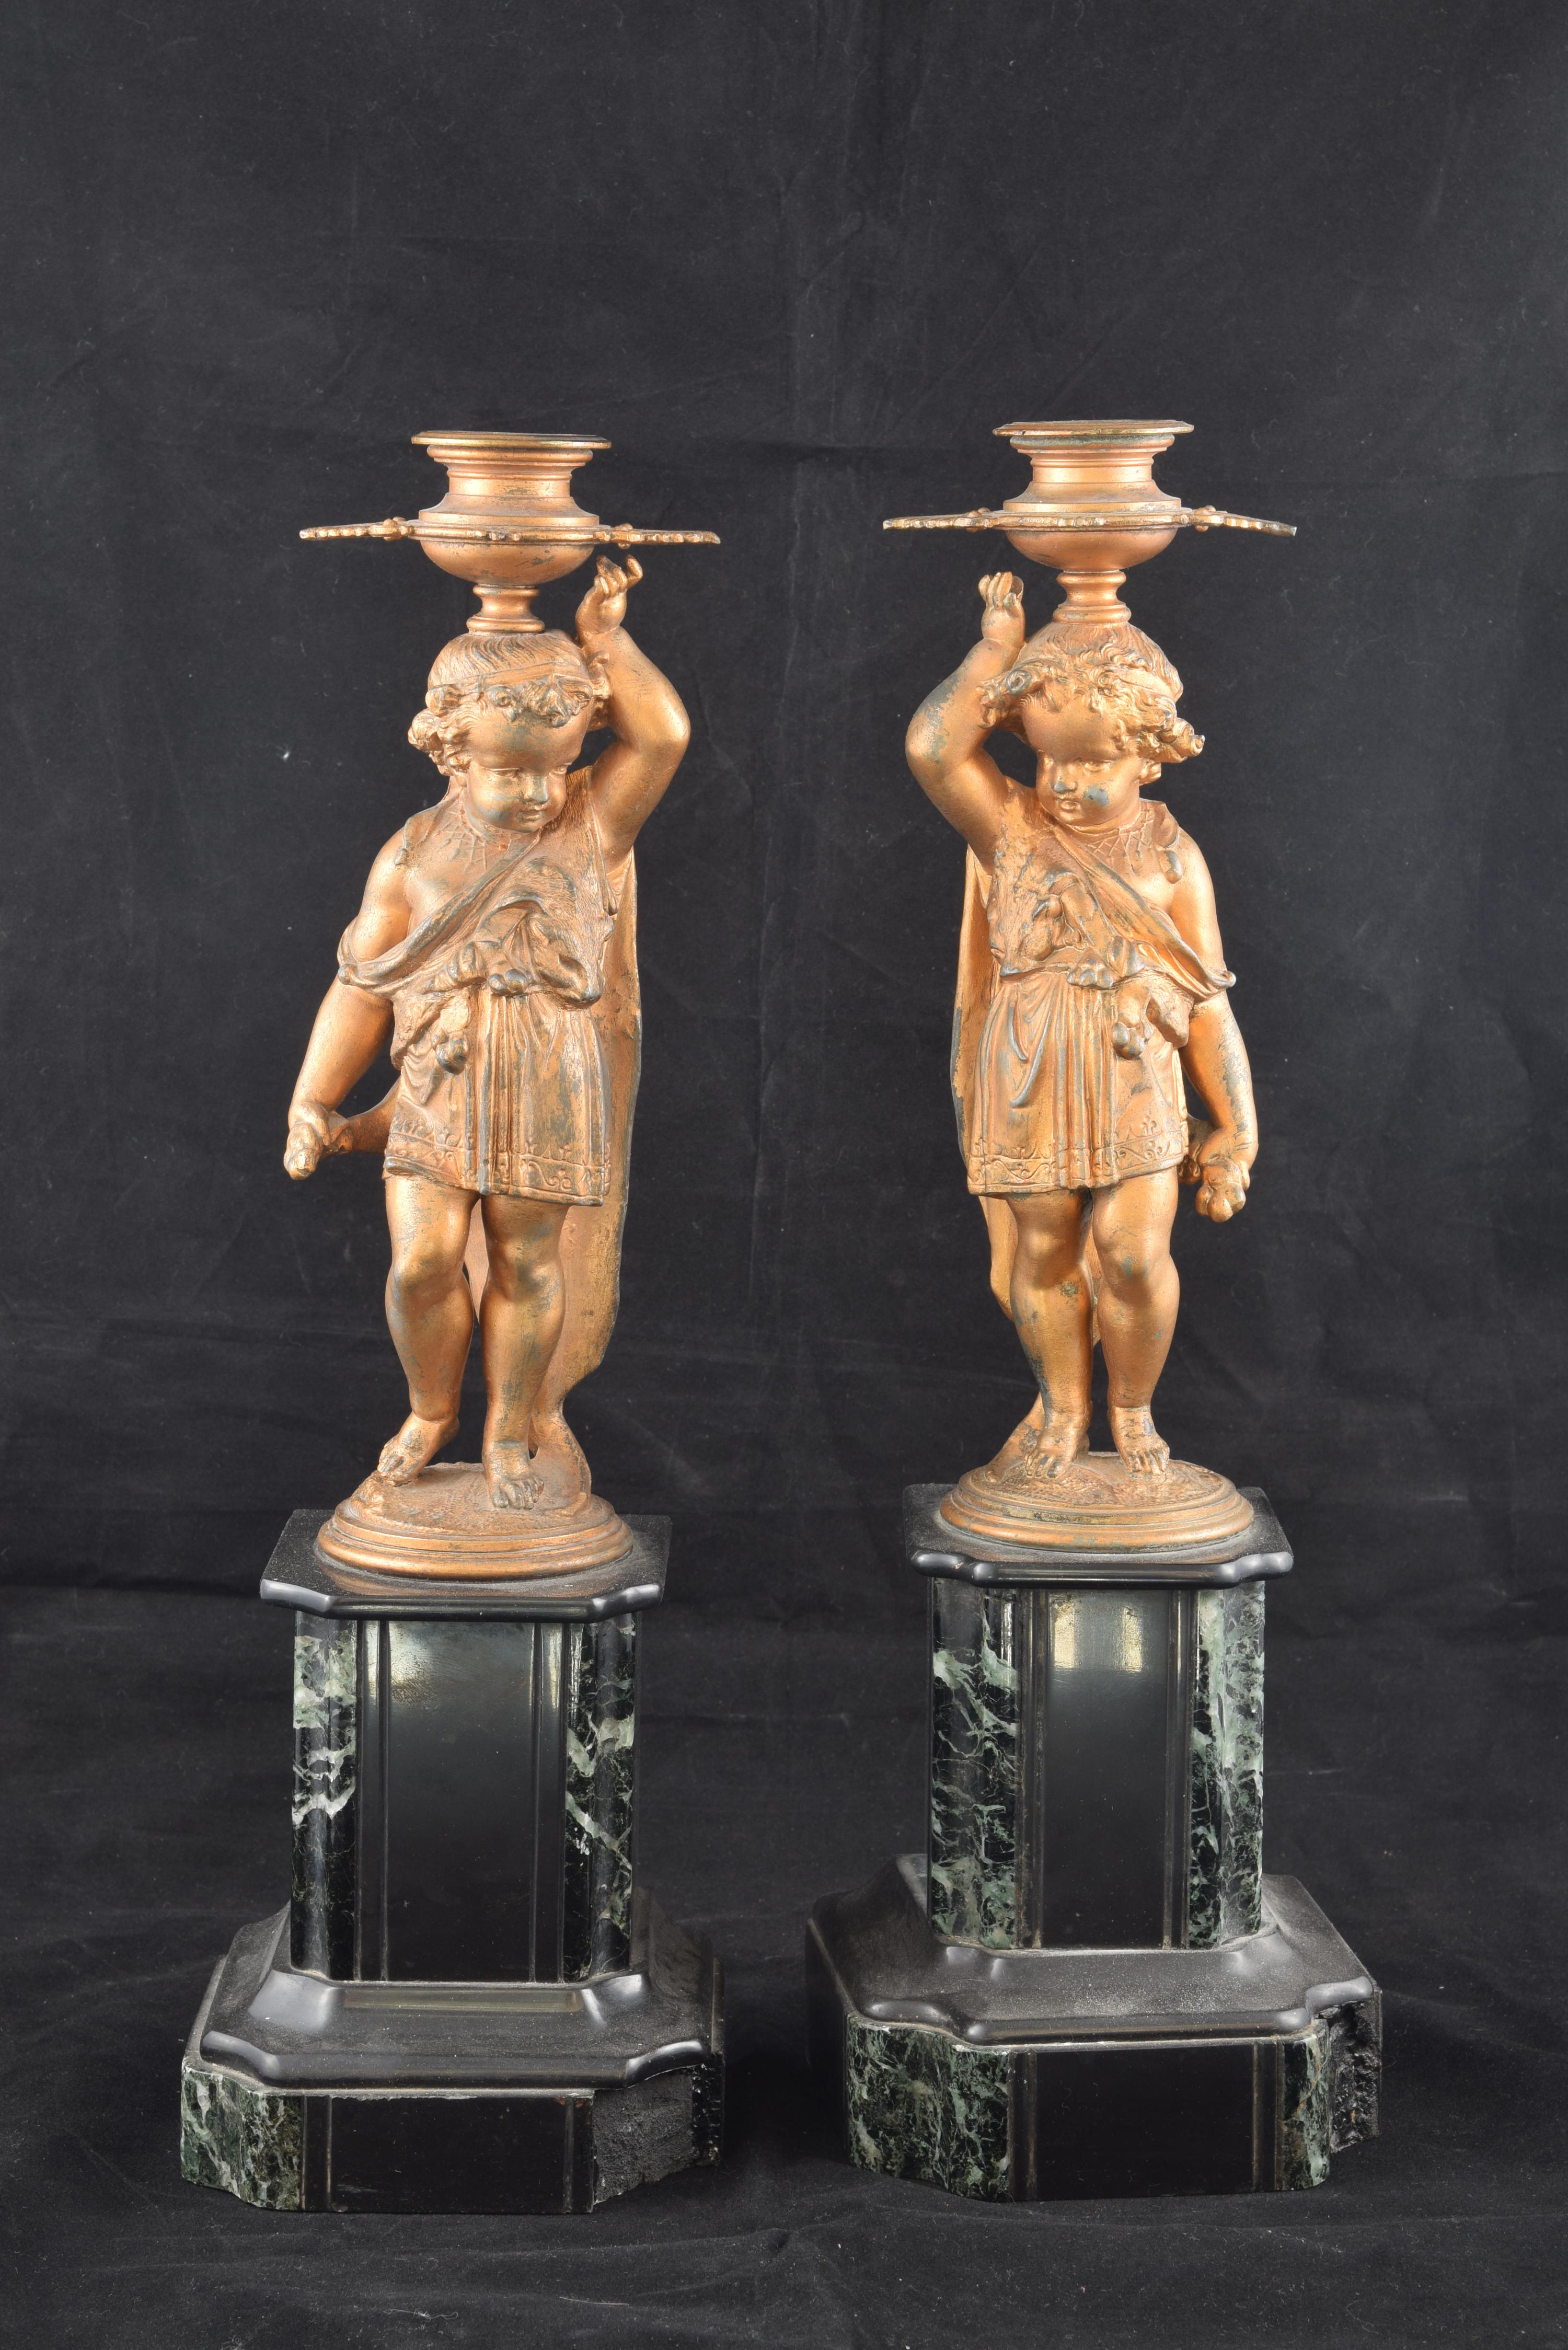 Pair of candlesticks made in calamine on dark marble bases that have two sculptures of children in similar positions. The proportions, positions, decorative elements, etc. of these two figures show a clear influence of models of French